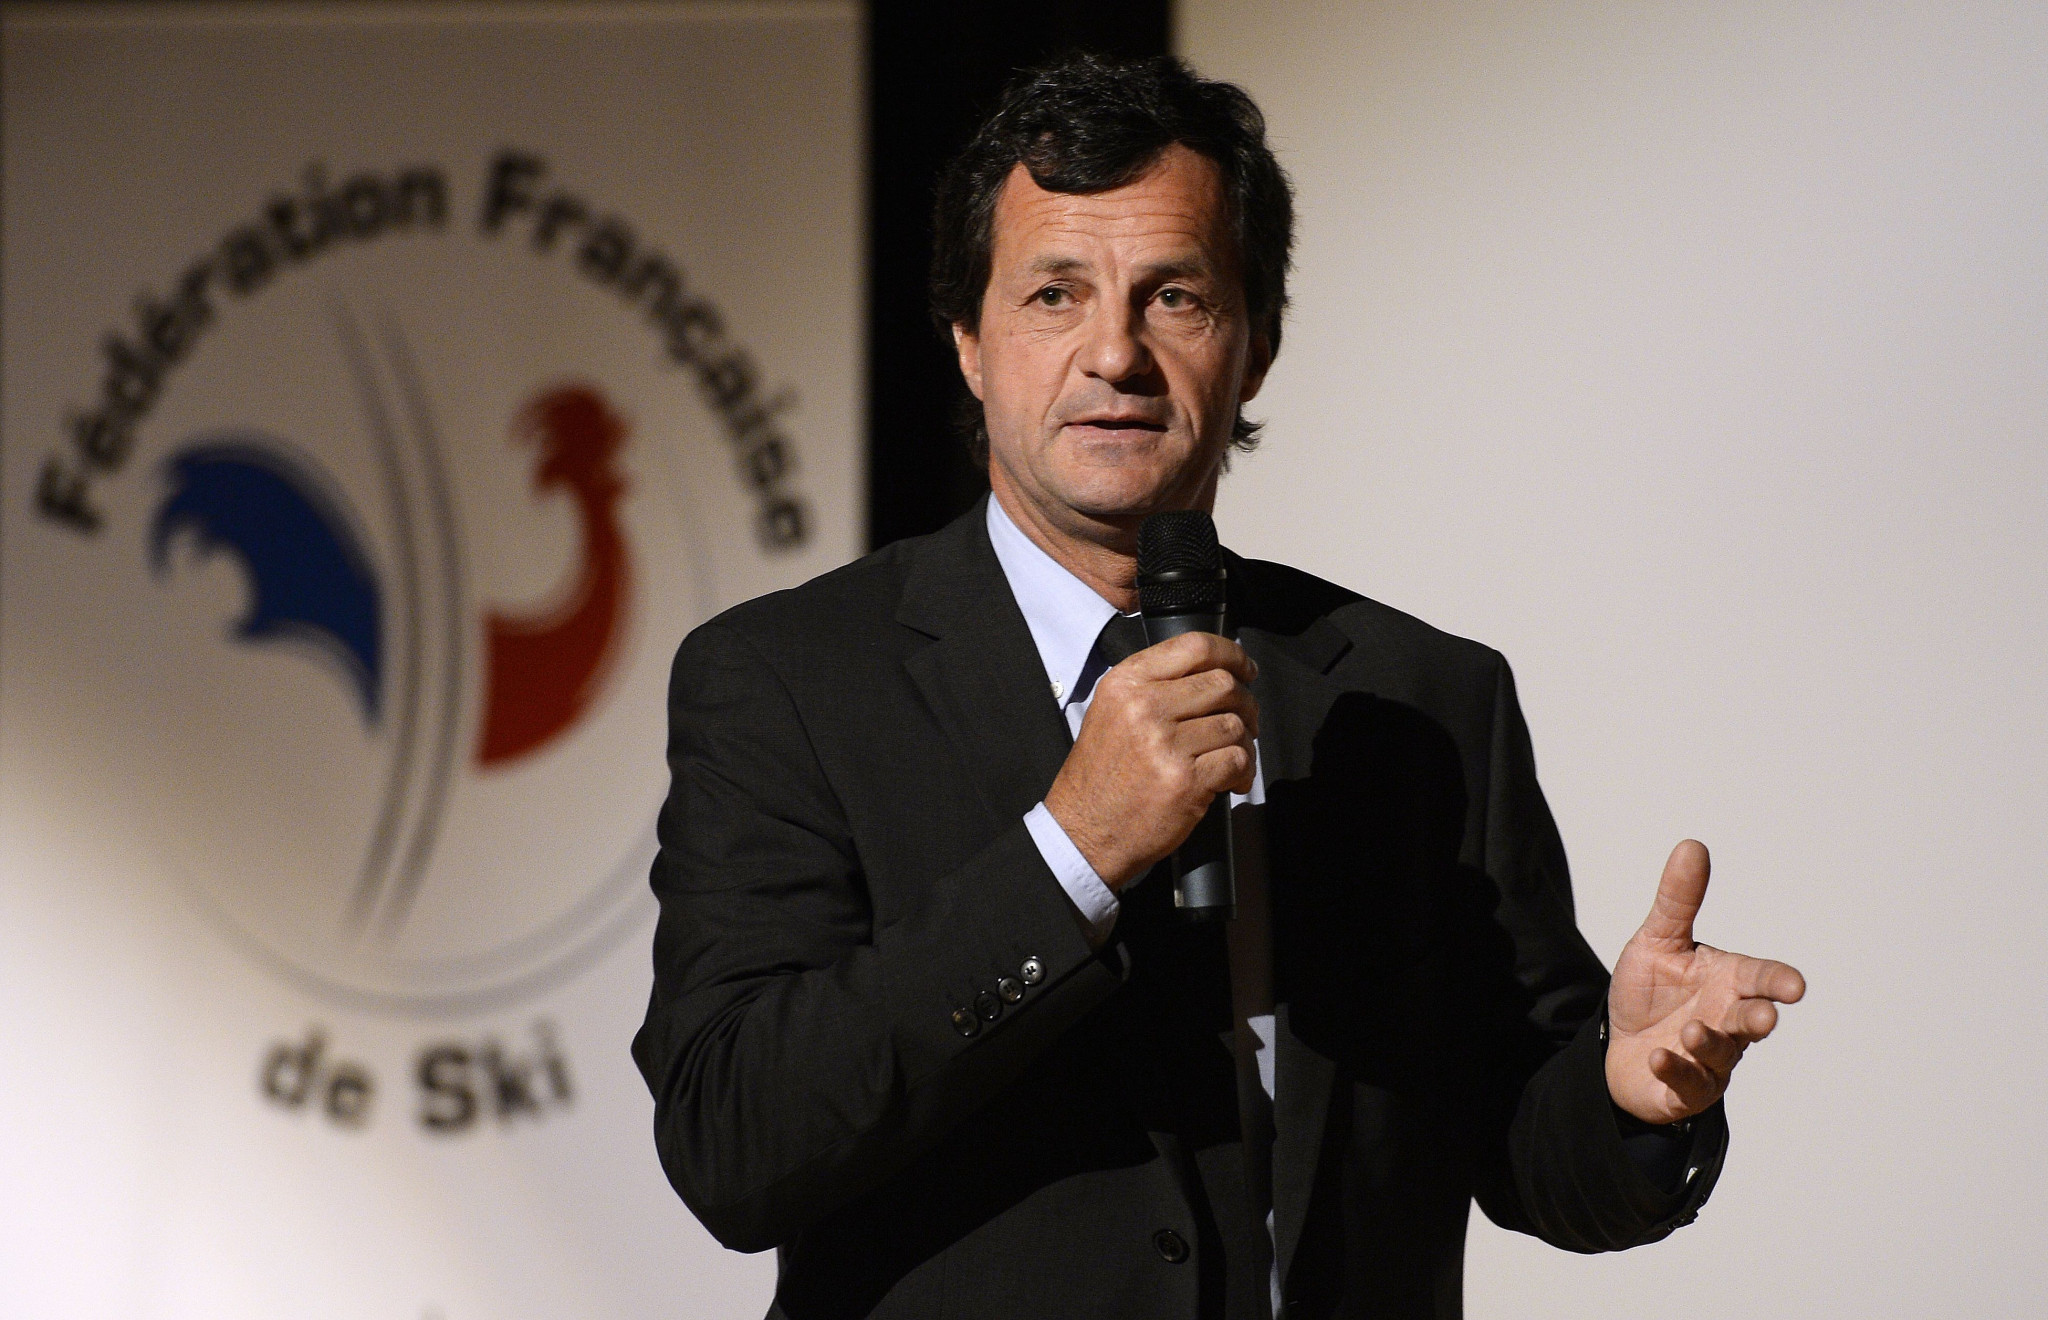 Michel Vion has been re-elected President of the French Ski Federation ©Getty Images